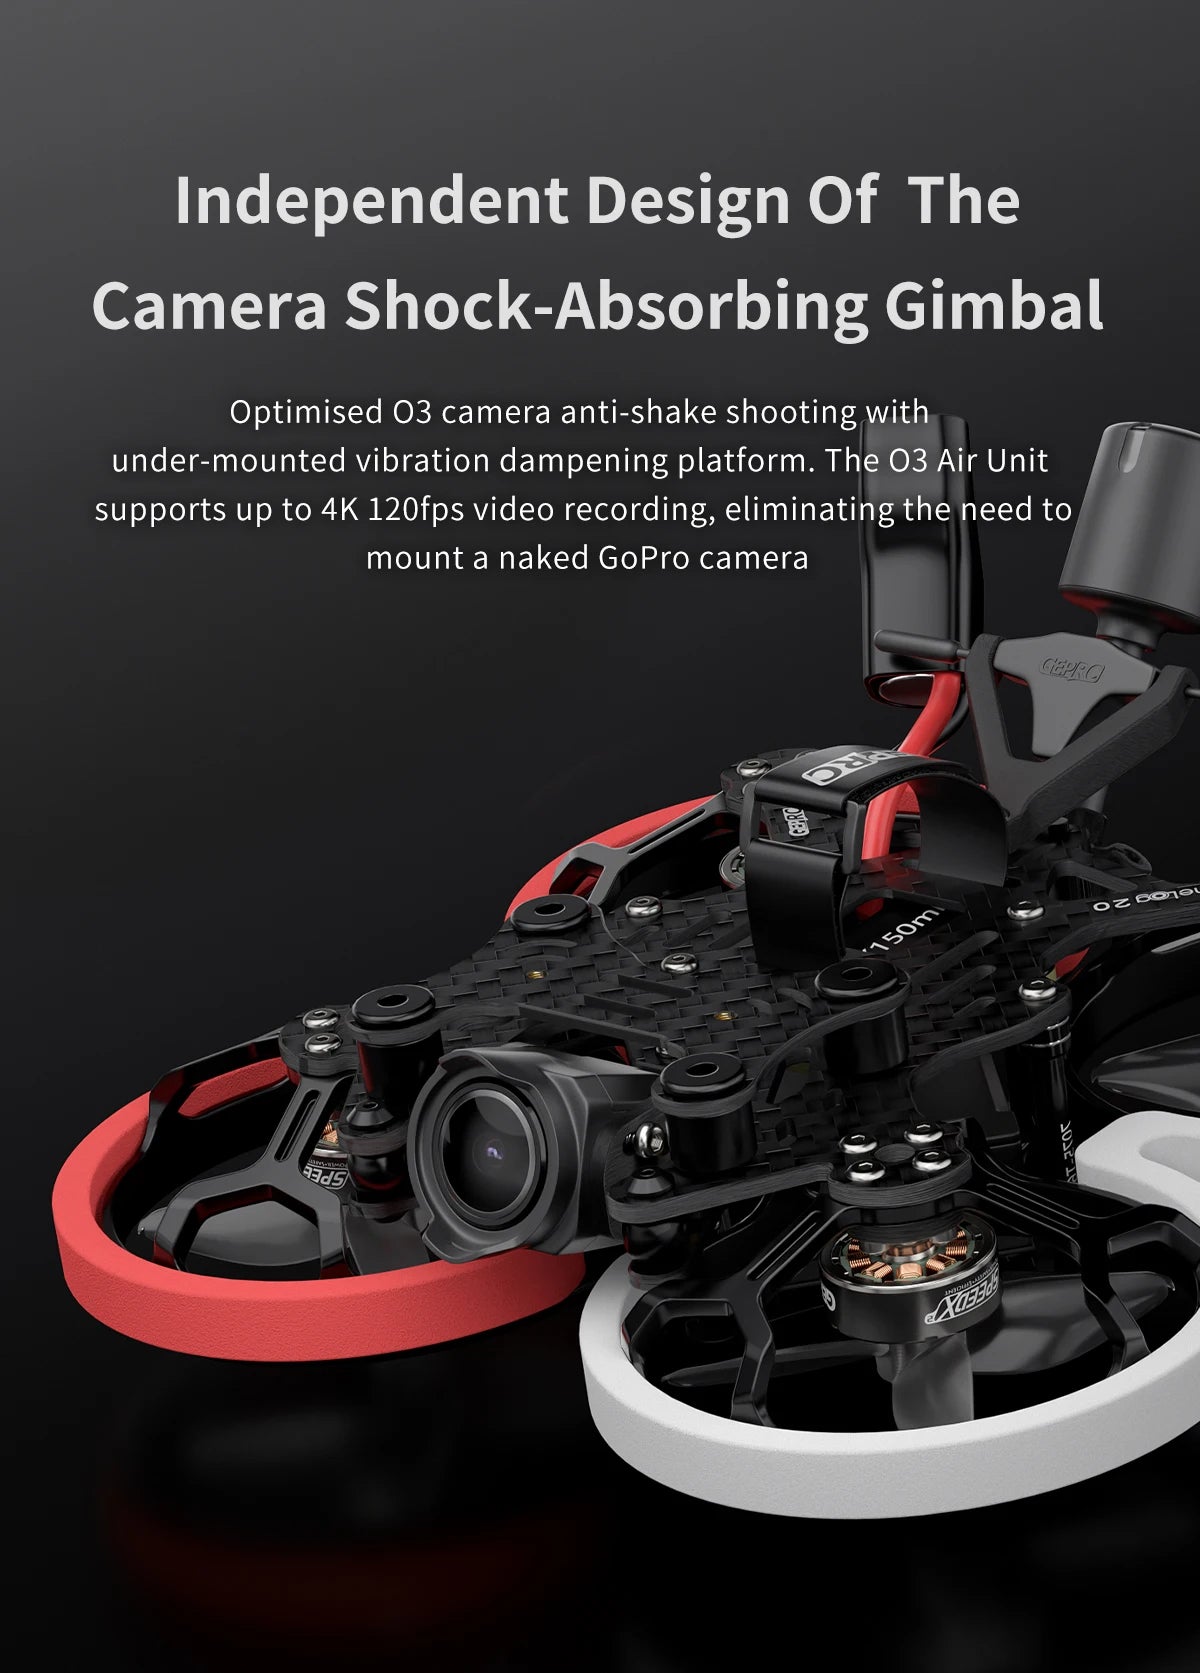 GEPRC Cinelog20 HD Wasp FPV Drone, the 03 Air Unit supports up to 4K 120fps video recording . GoPro